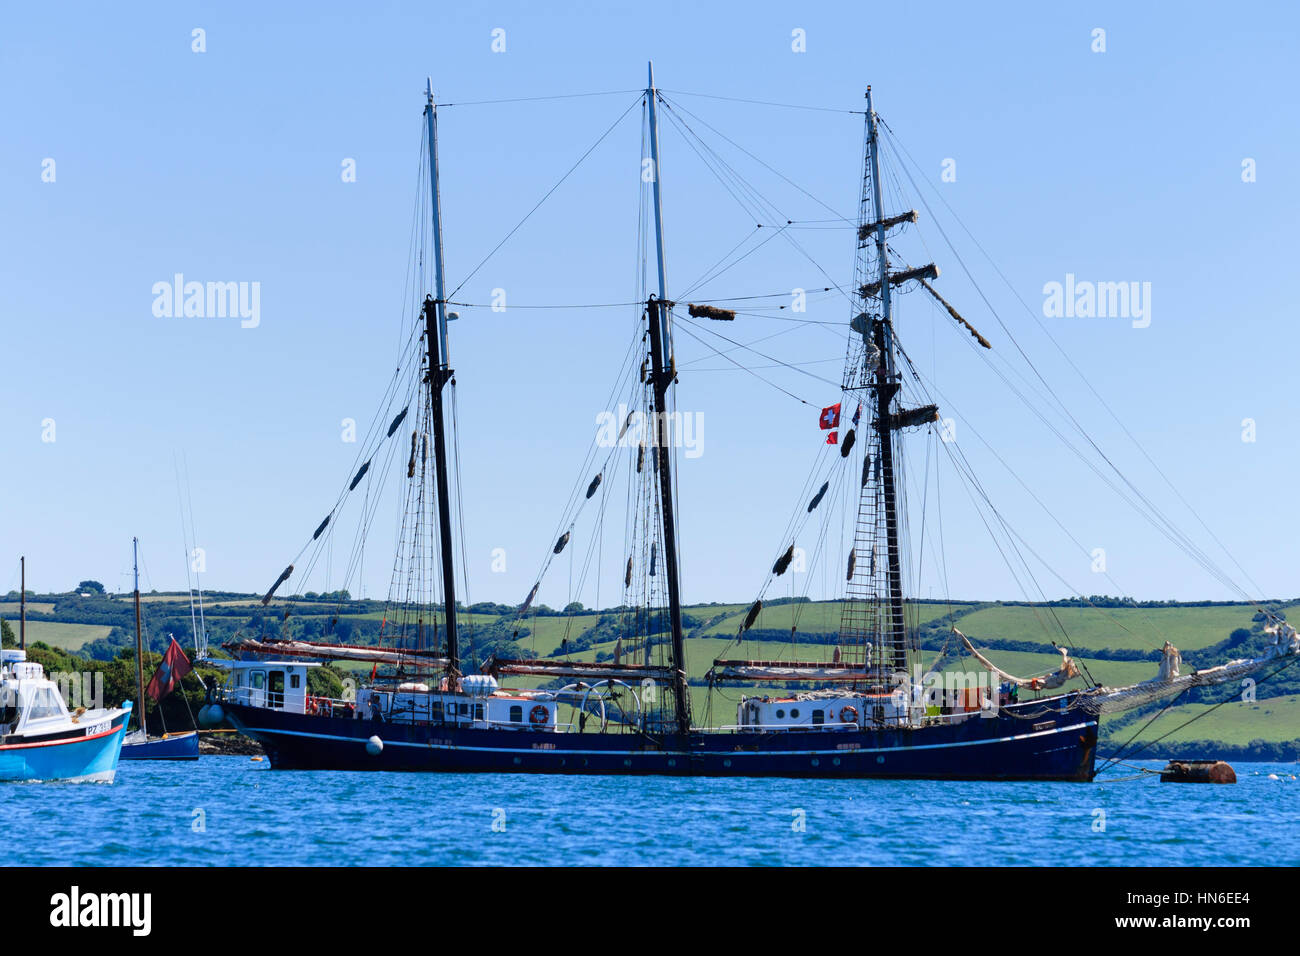 Swiss registered 3 masted tall ship, Salomon, moored in the Penryn River, Falmouth, Cornwall, UK, June 2010 Stock Photo